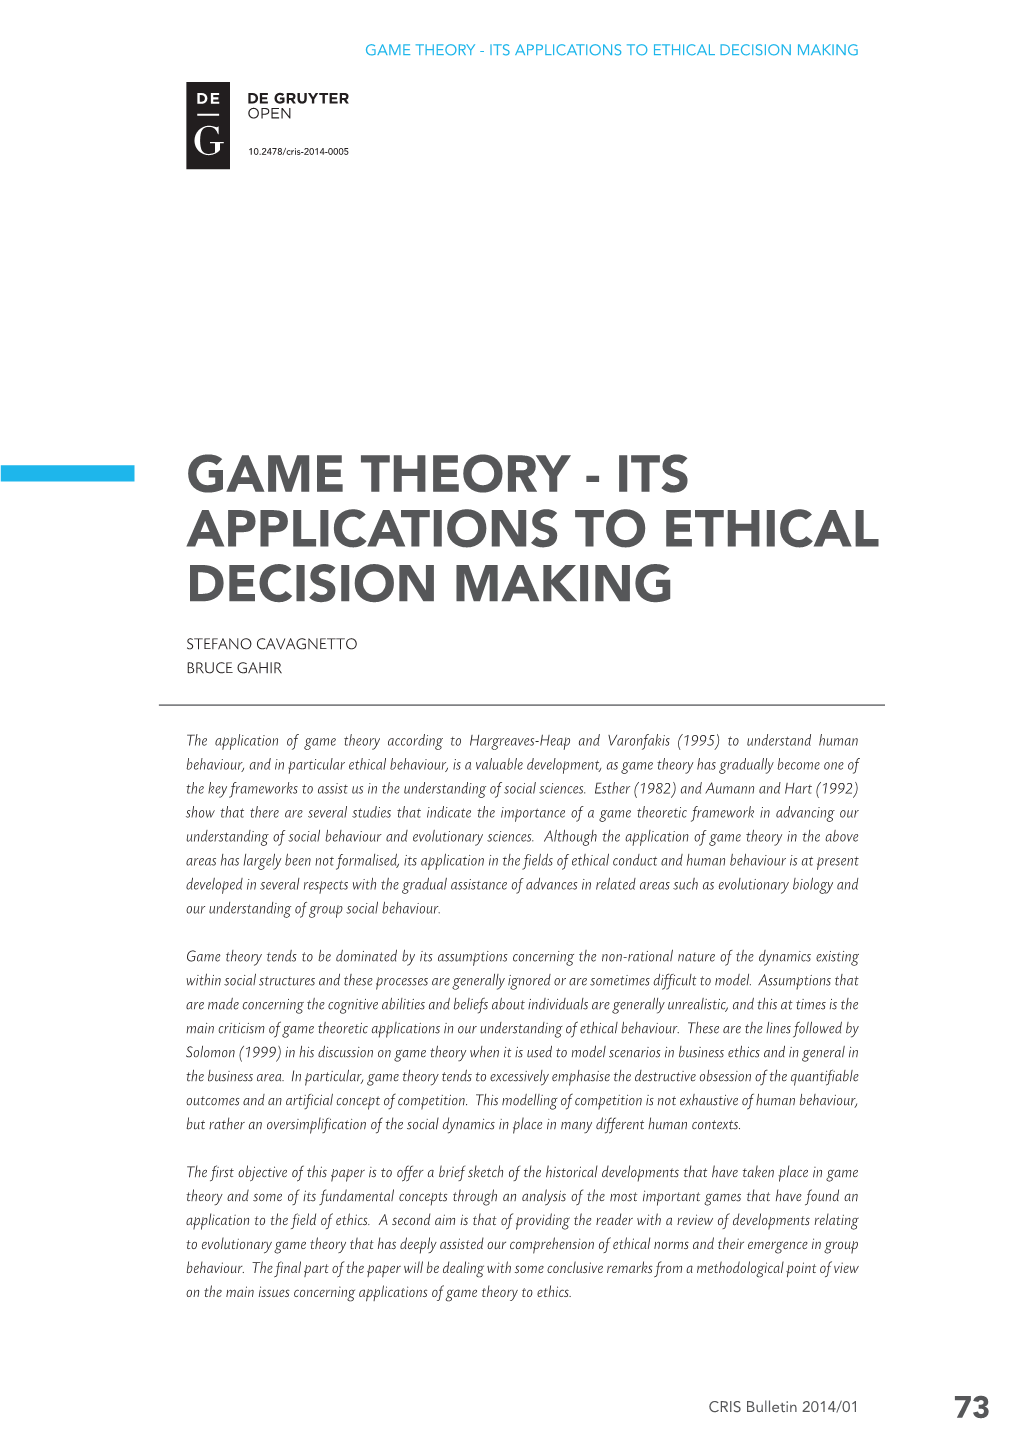 Game Theory - Its Applications to Ethical Decision Making